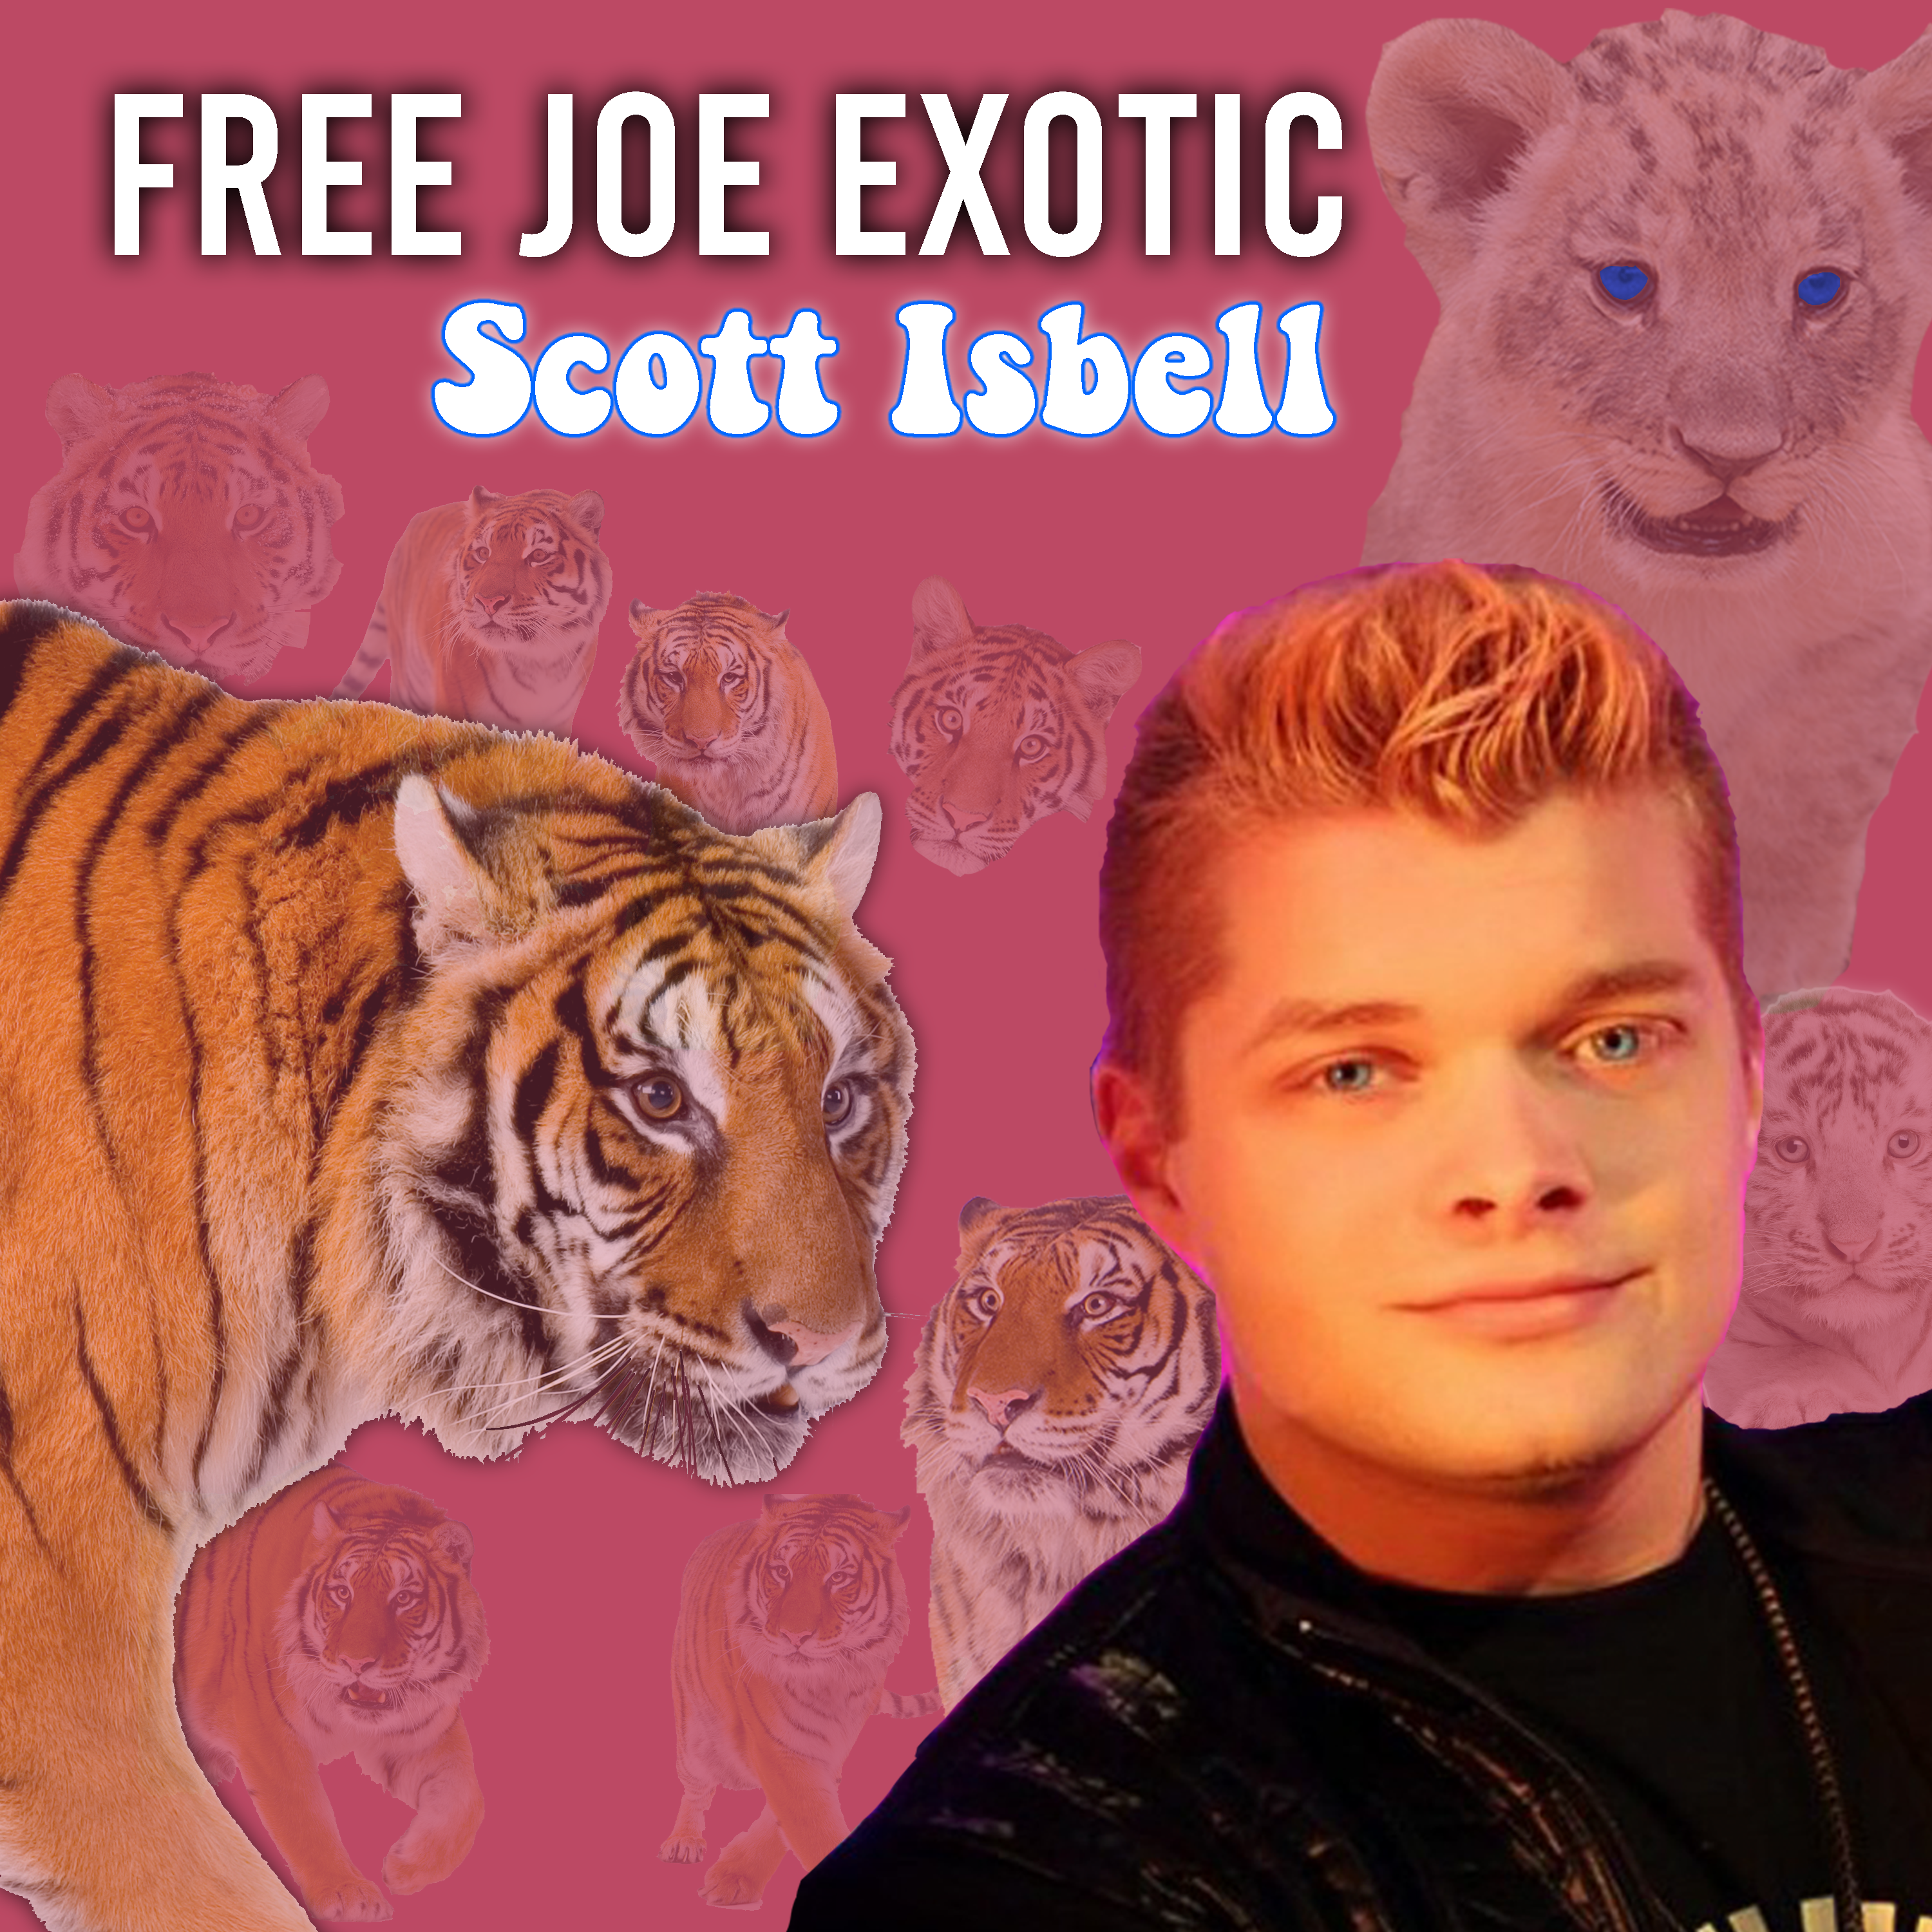 THE Free Joe Exotic Song has Arrived by Scott Isbell